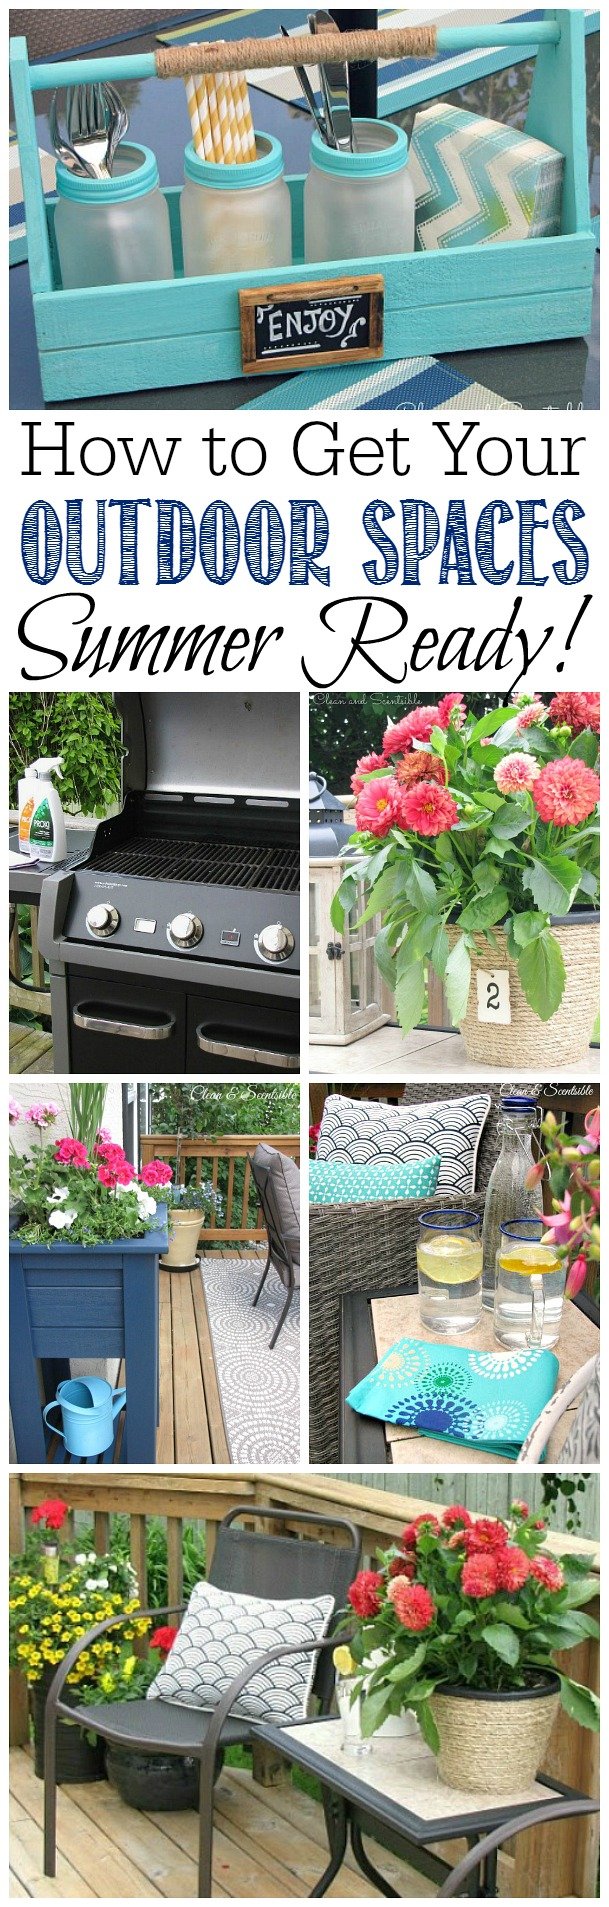 How to get your outdoor spaces ready for summer with free printables to keep you on track!  Part of The Household Organization Diet.  